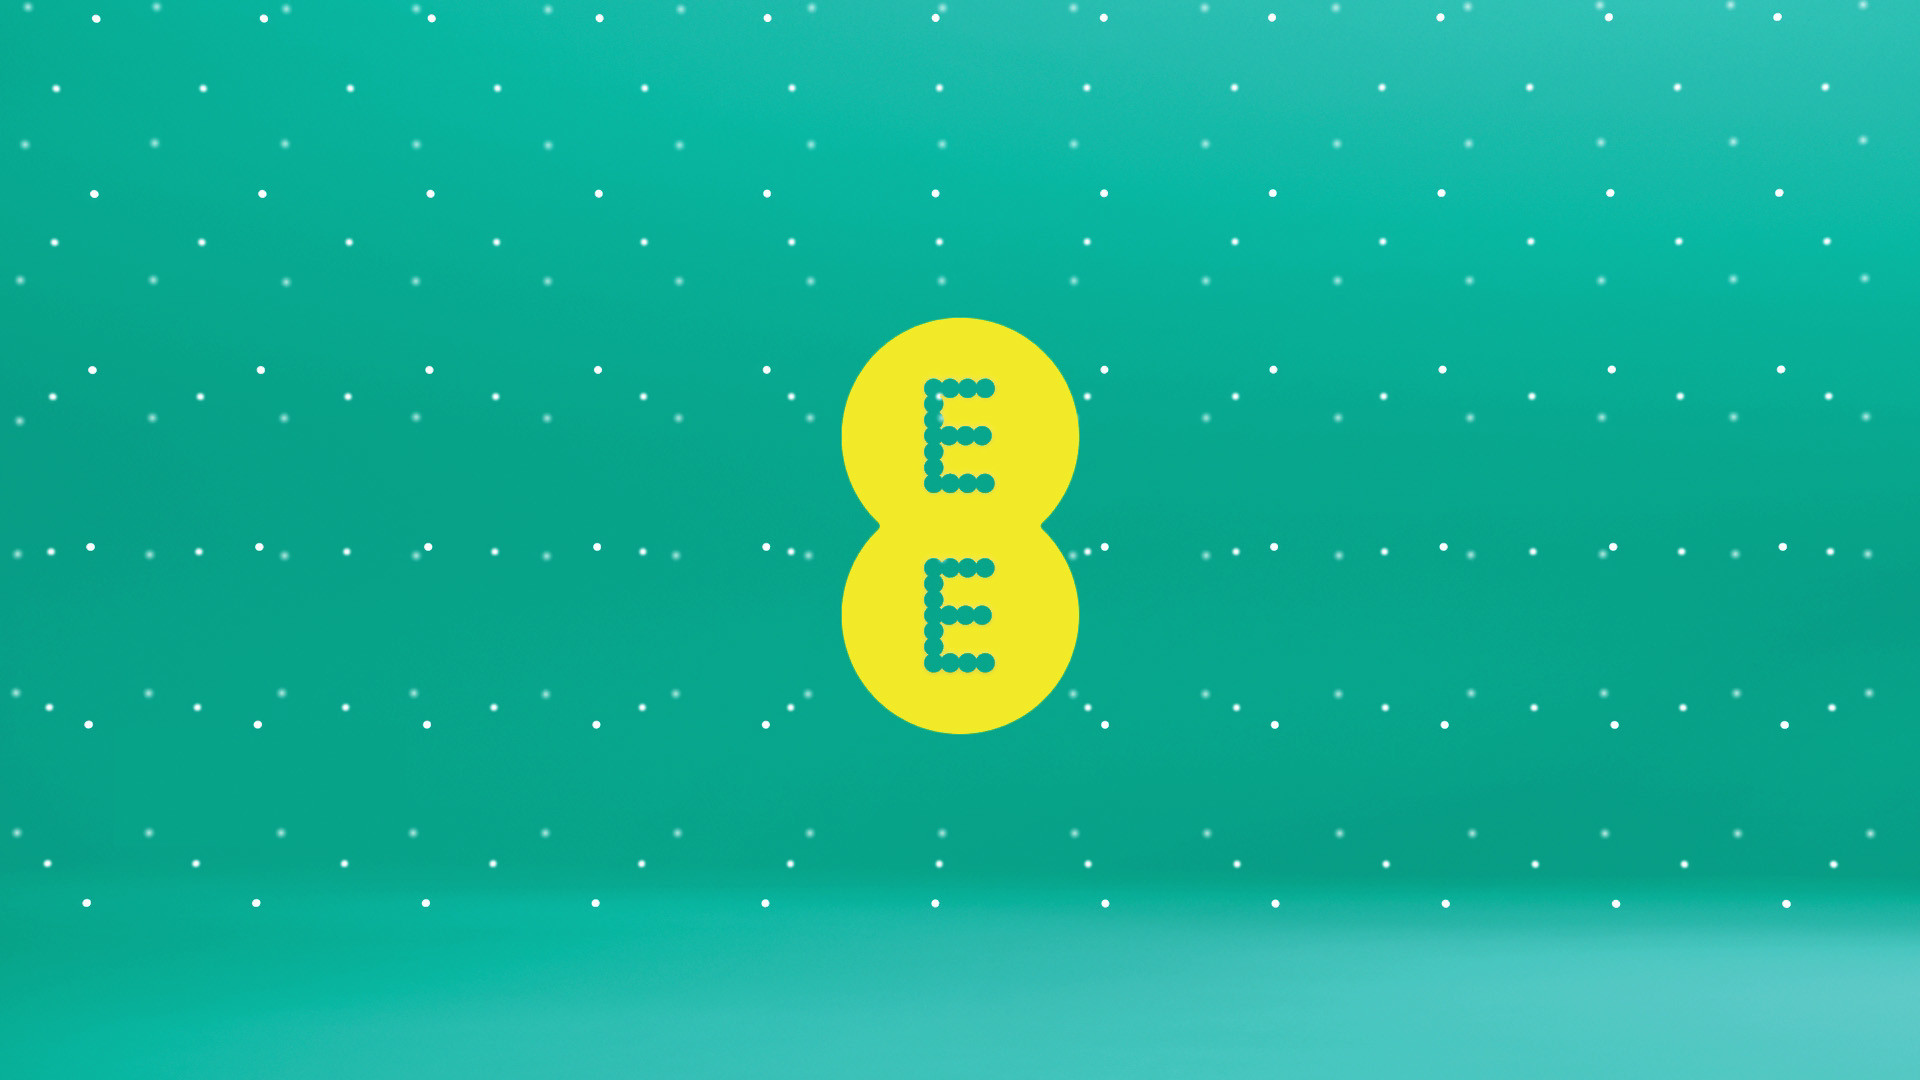 EE 4G expands into 11 more UK towns